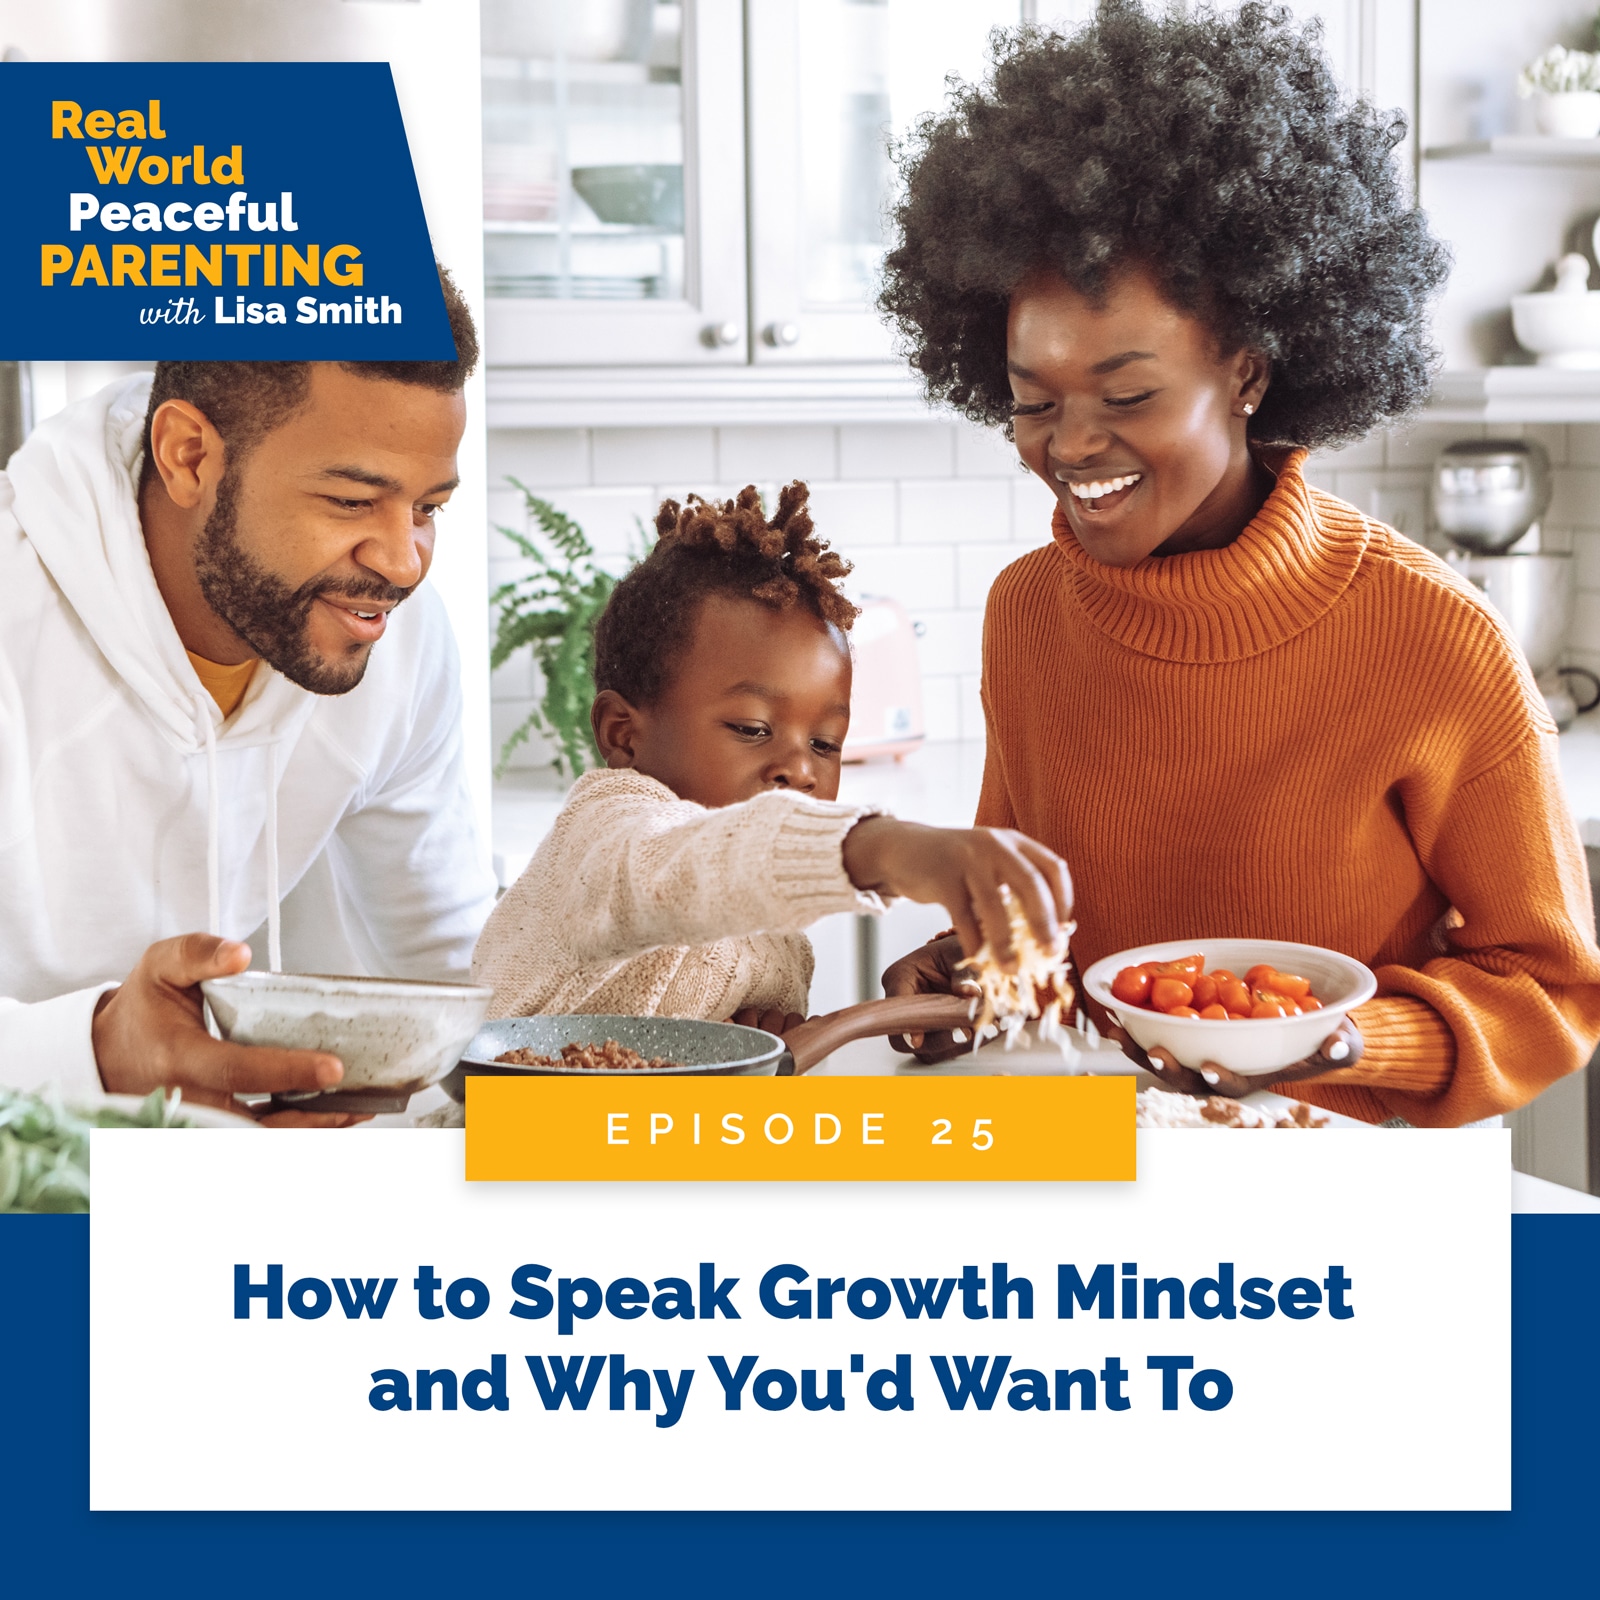 Real World Peaceful Parenting with Lisa Smith | How to Speak Growth Mindset and Why You'd Want To